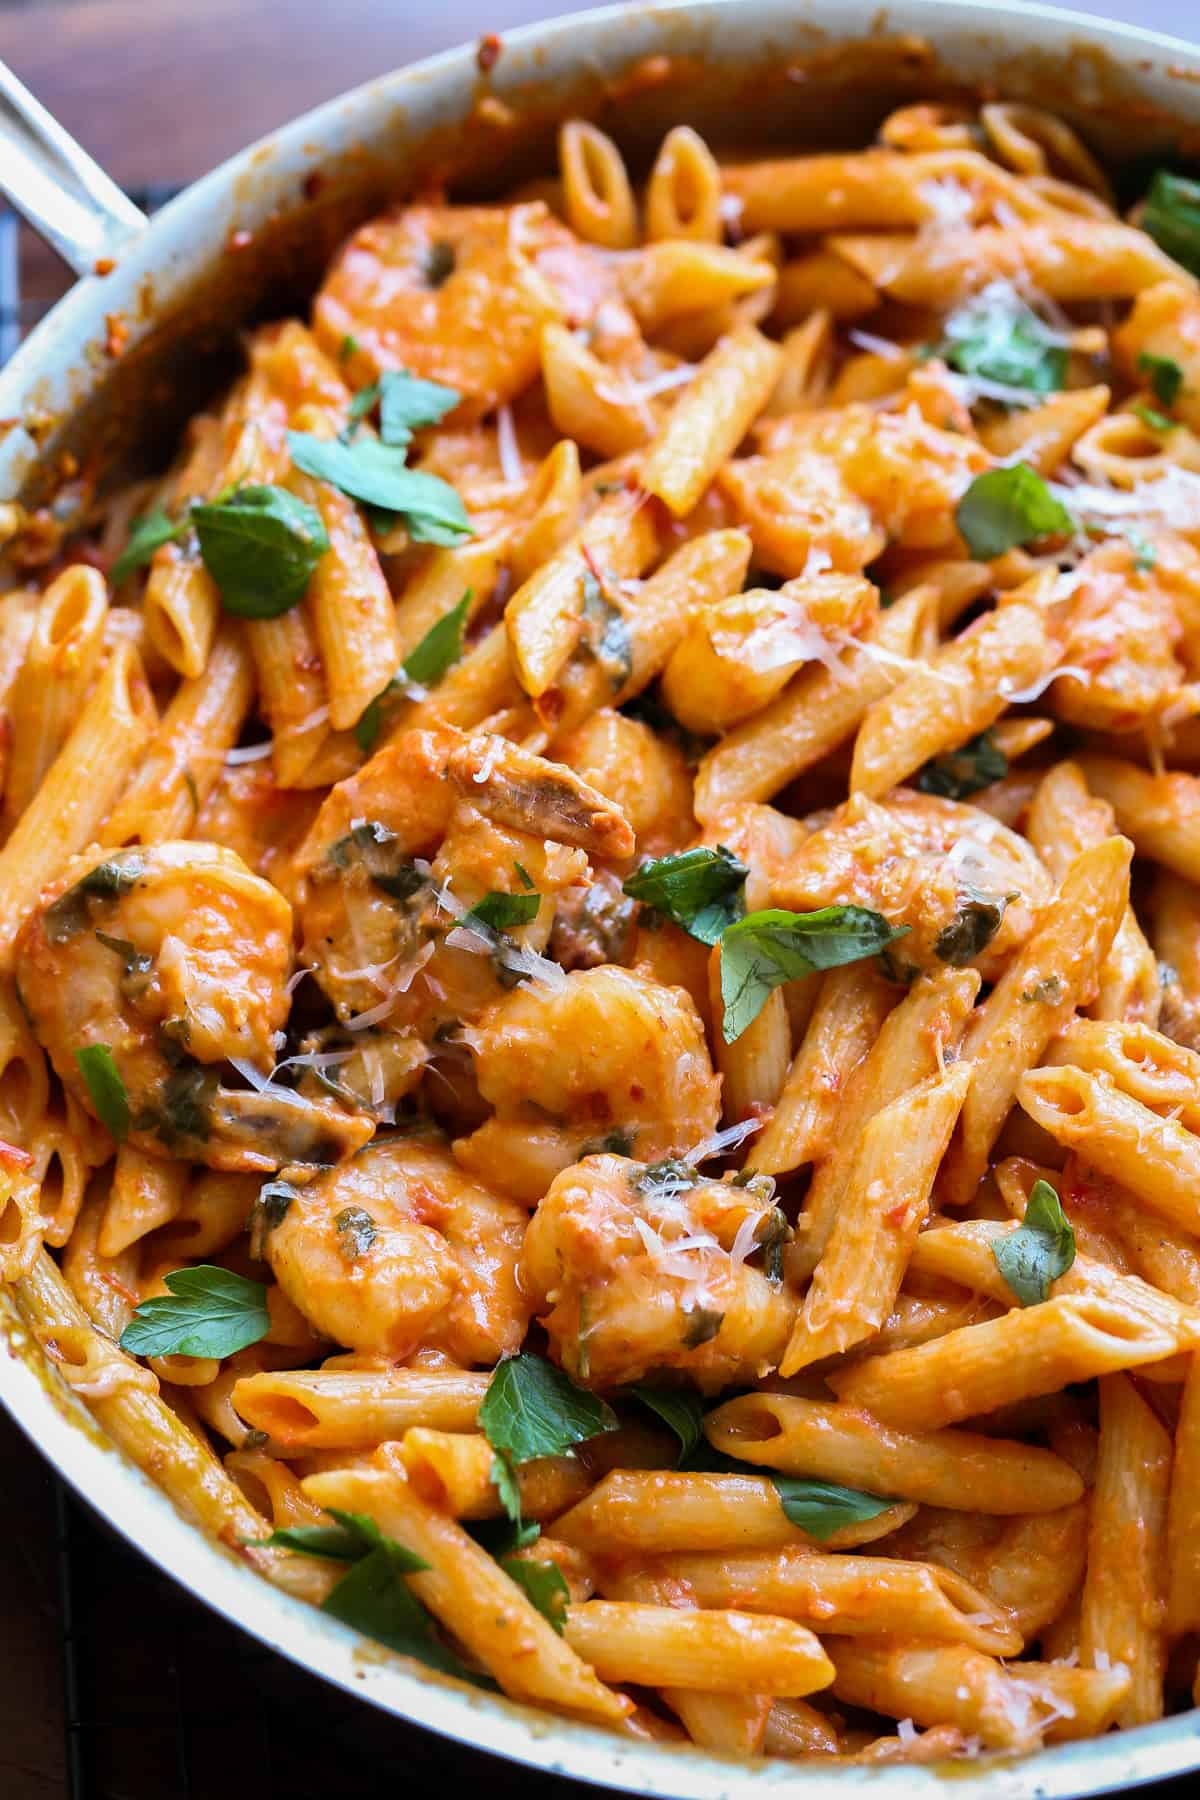 Penne pasta tossed in a creamy tomato sauce with shrimp